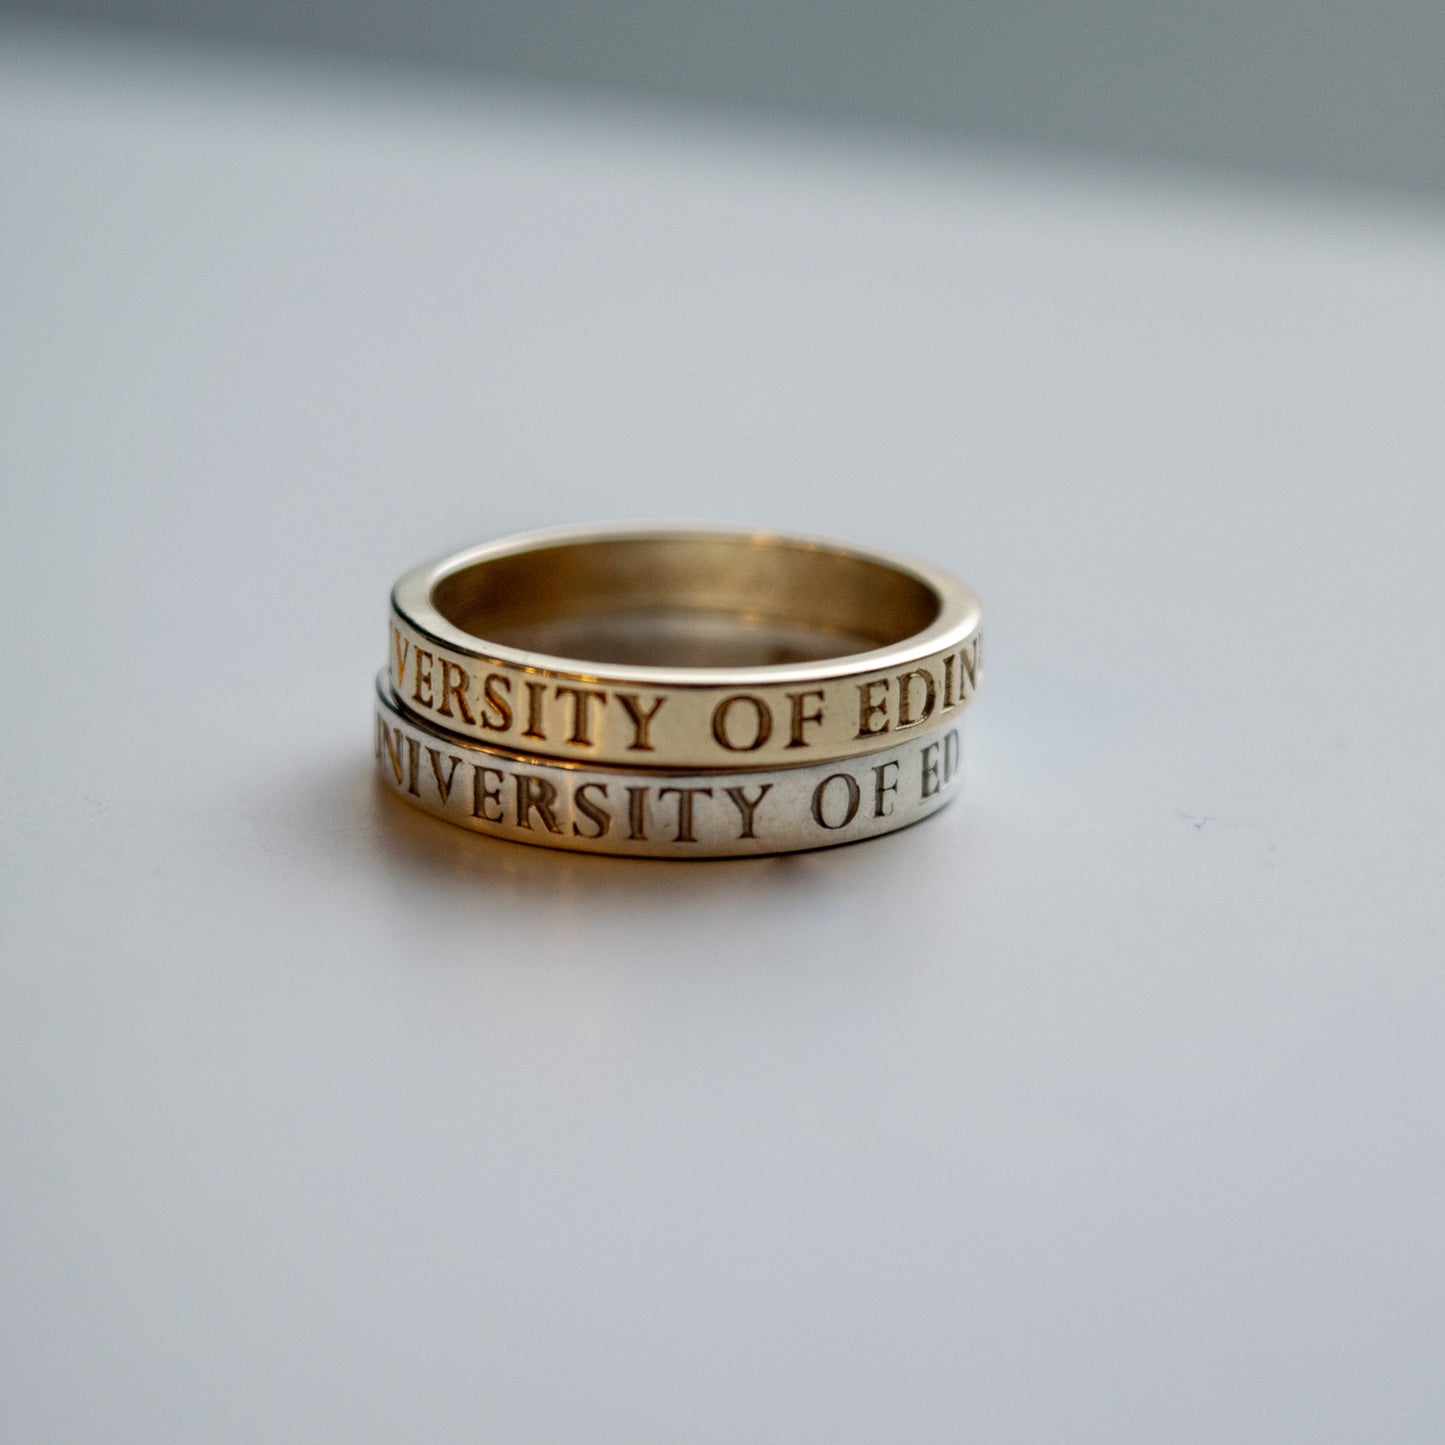 and image of the gold and silver thin band graduation rings on top of each other.